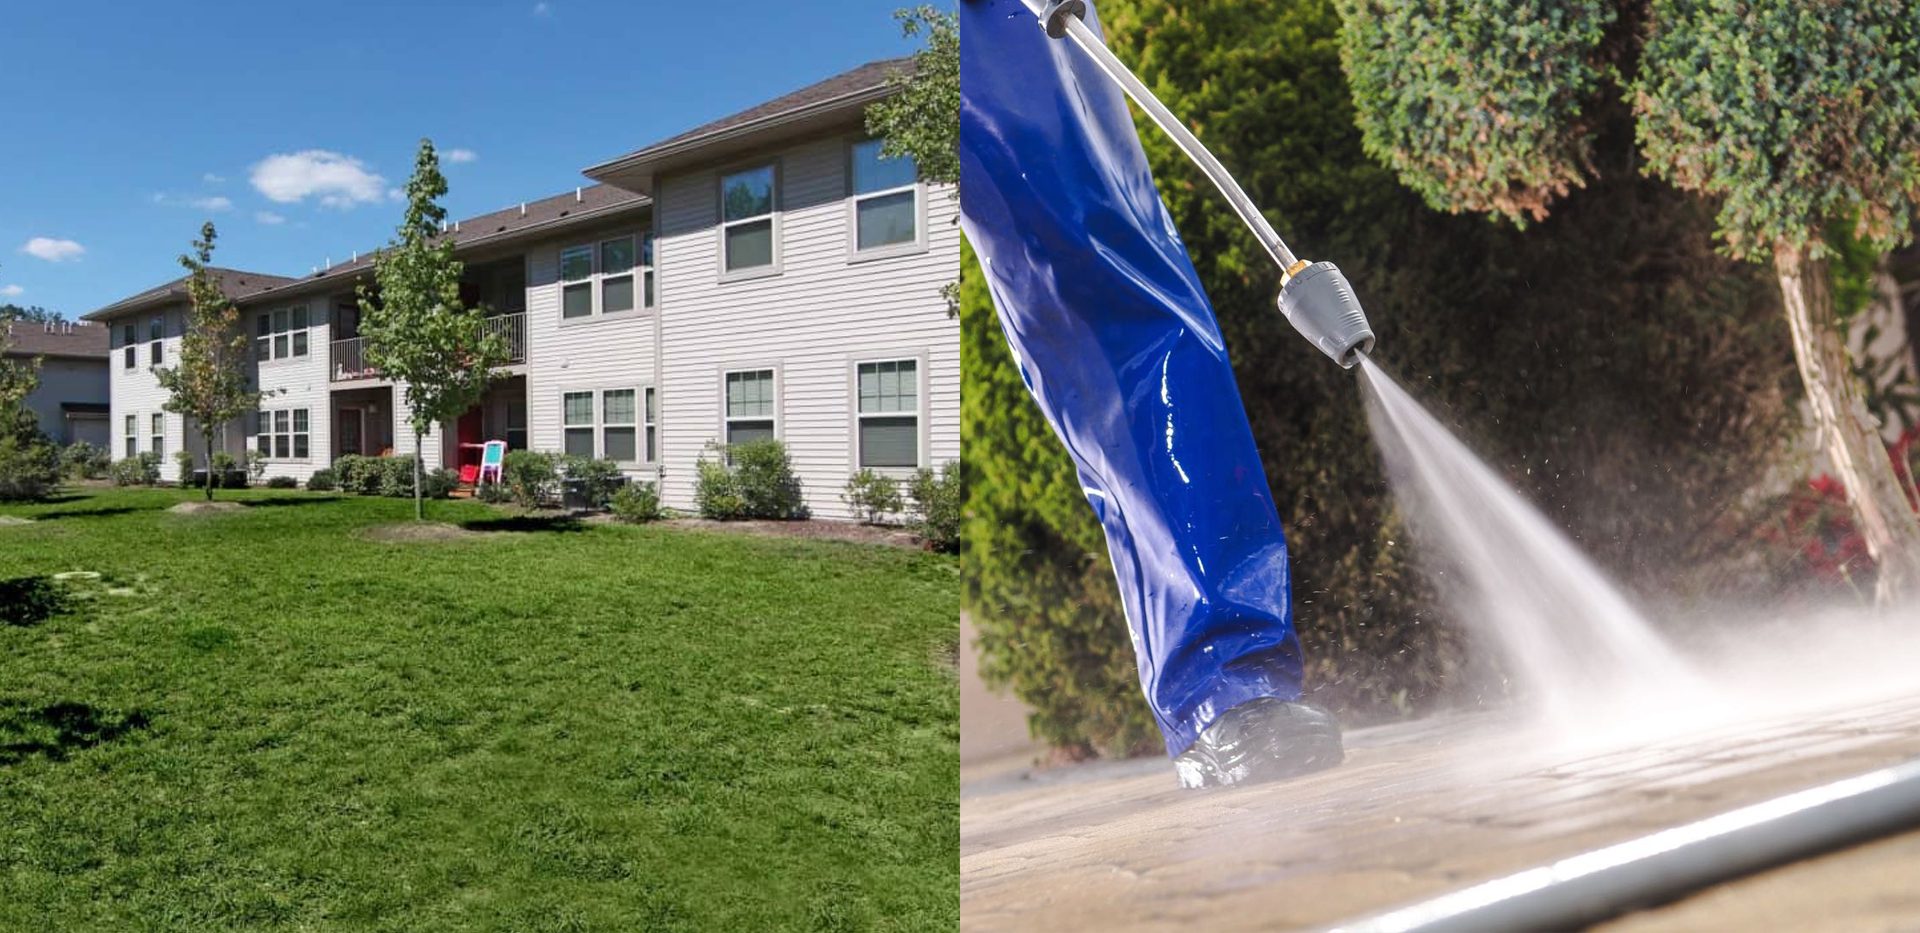 Power Washing, Window & Gutter Cleaning Services in Manalapan, NJ